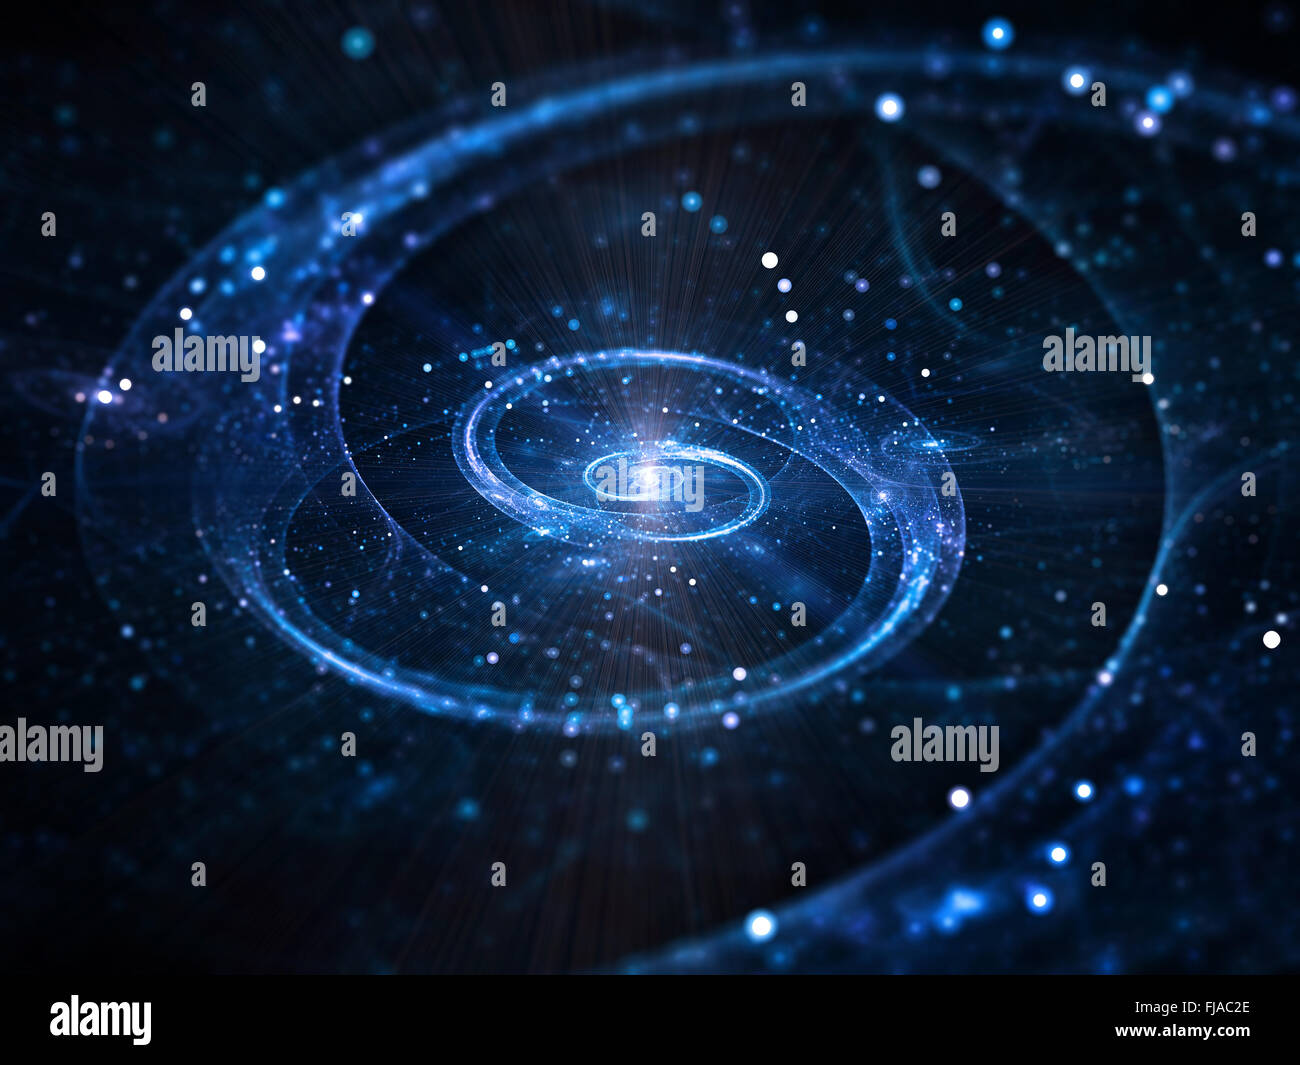 Spiral galaxy in deep space, abstract background Stock Photo